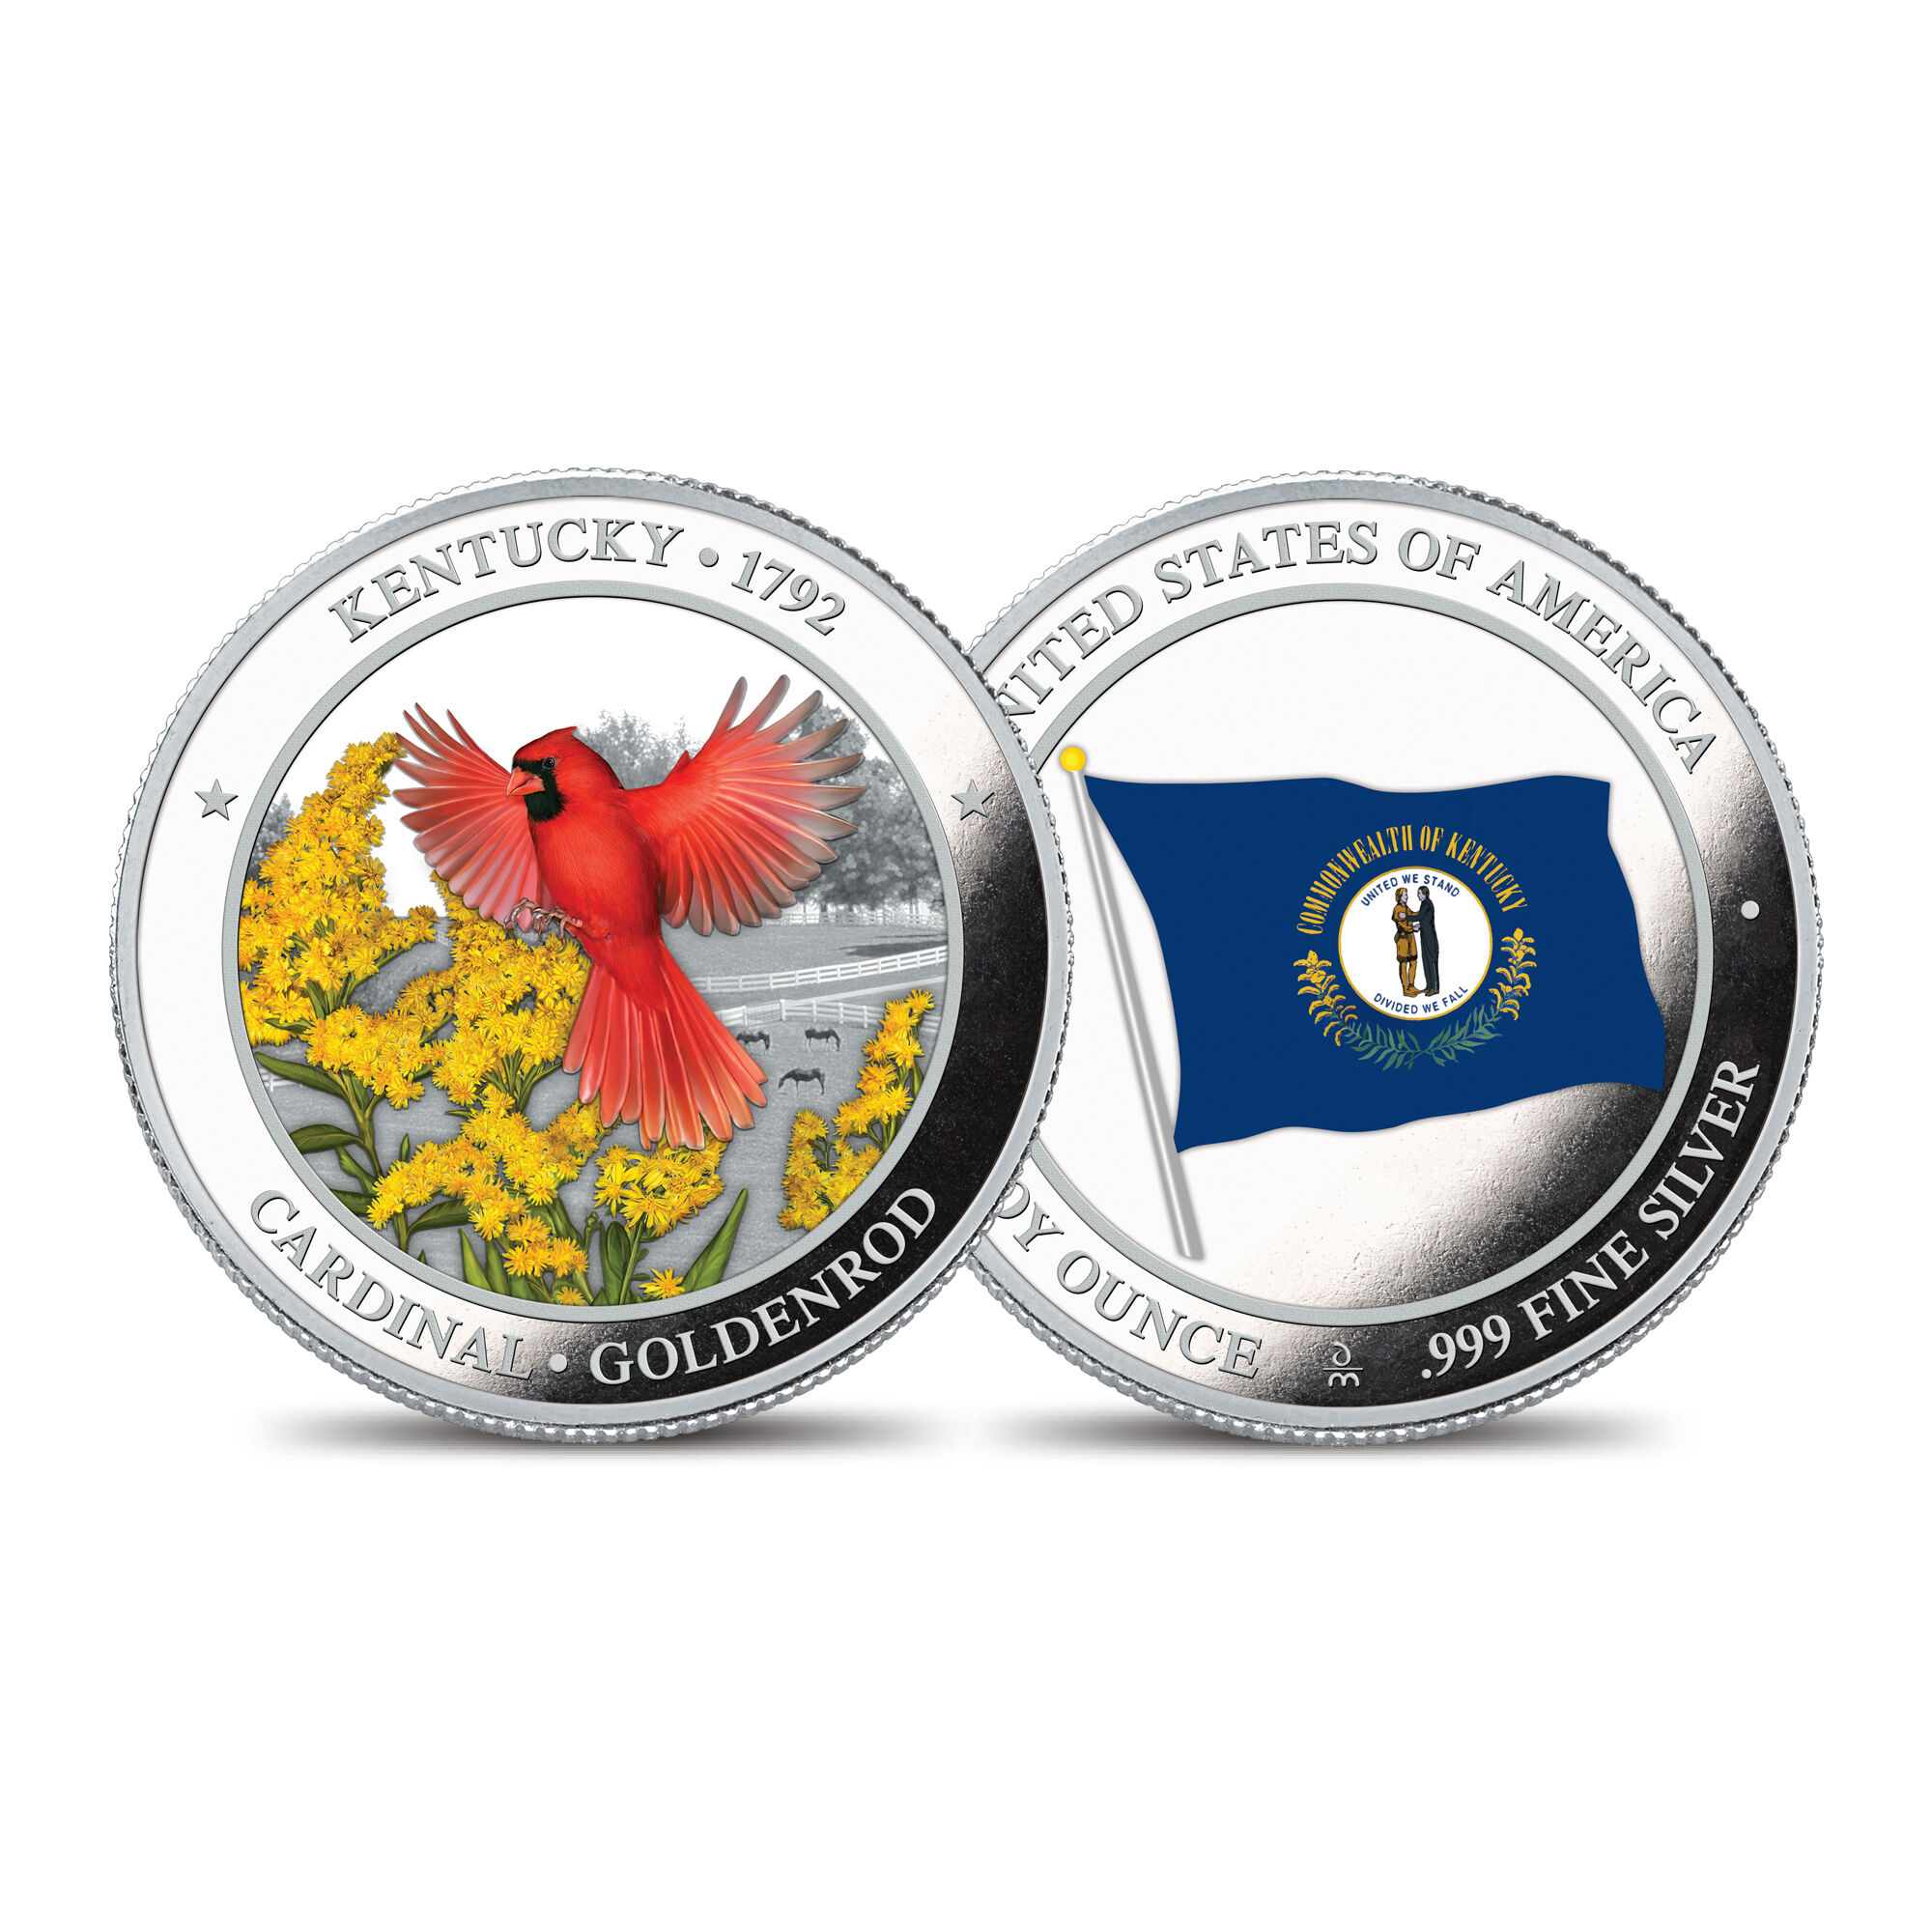 The State Bird and Flower Silver Commemoratives 2167 0088 a commemorativeKY